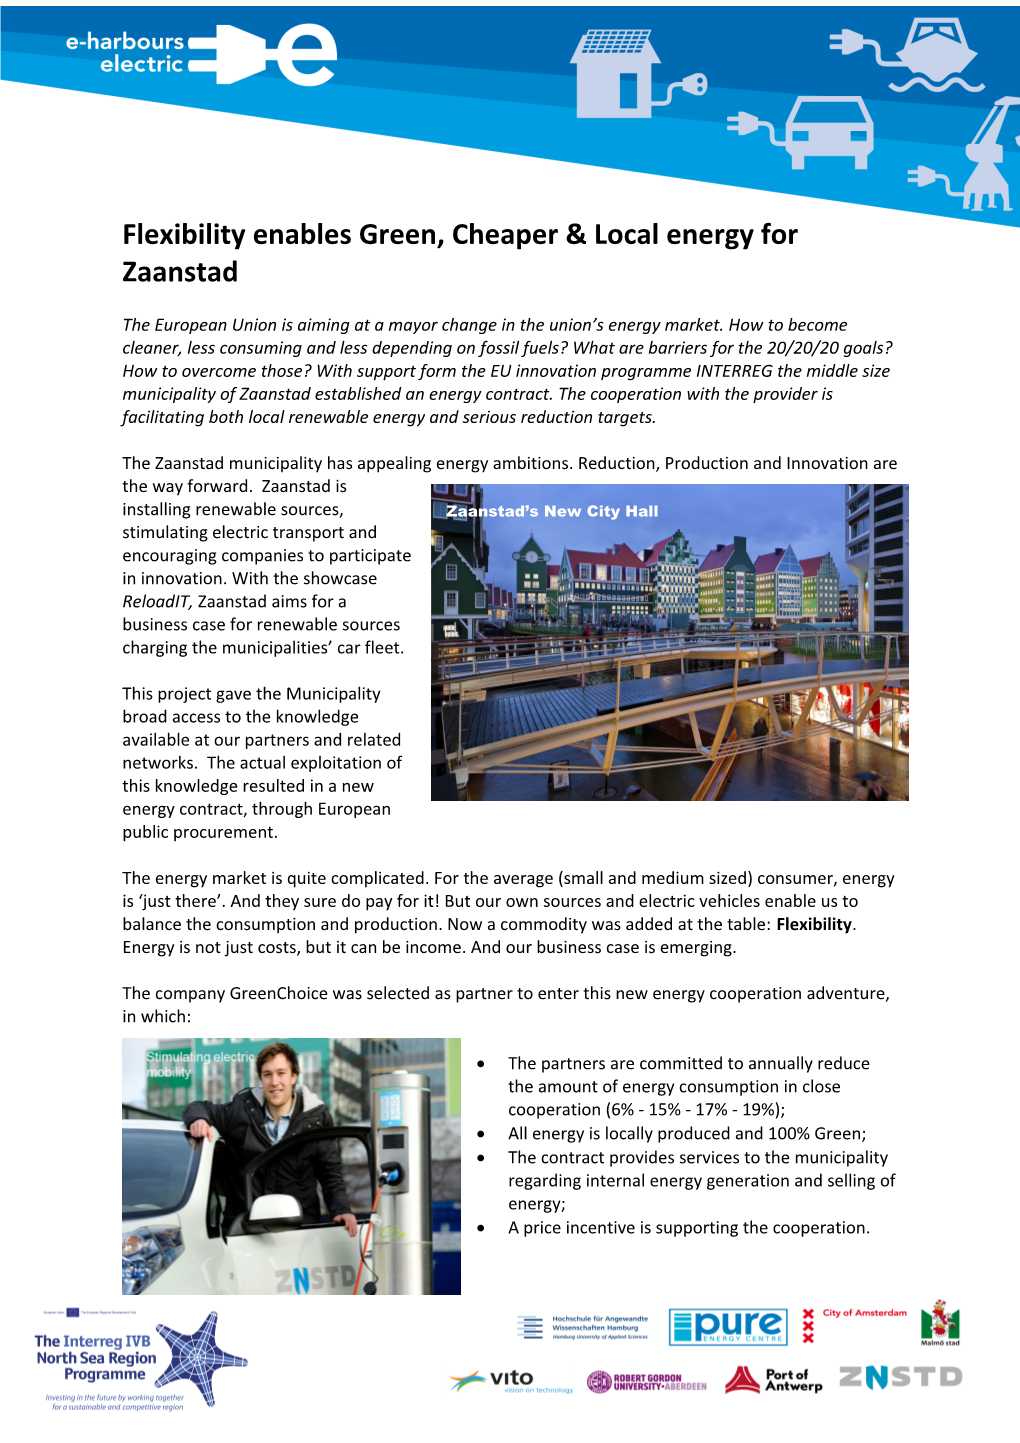 Flexibility Enables Green, Cheaper & Local Energy for Zaanstad